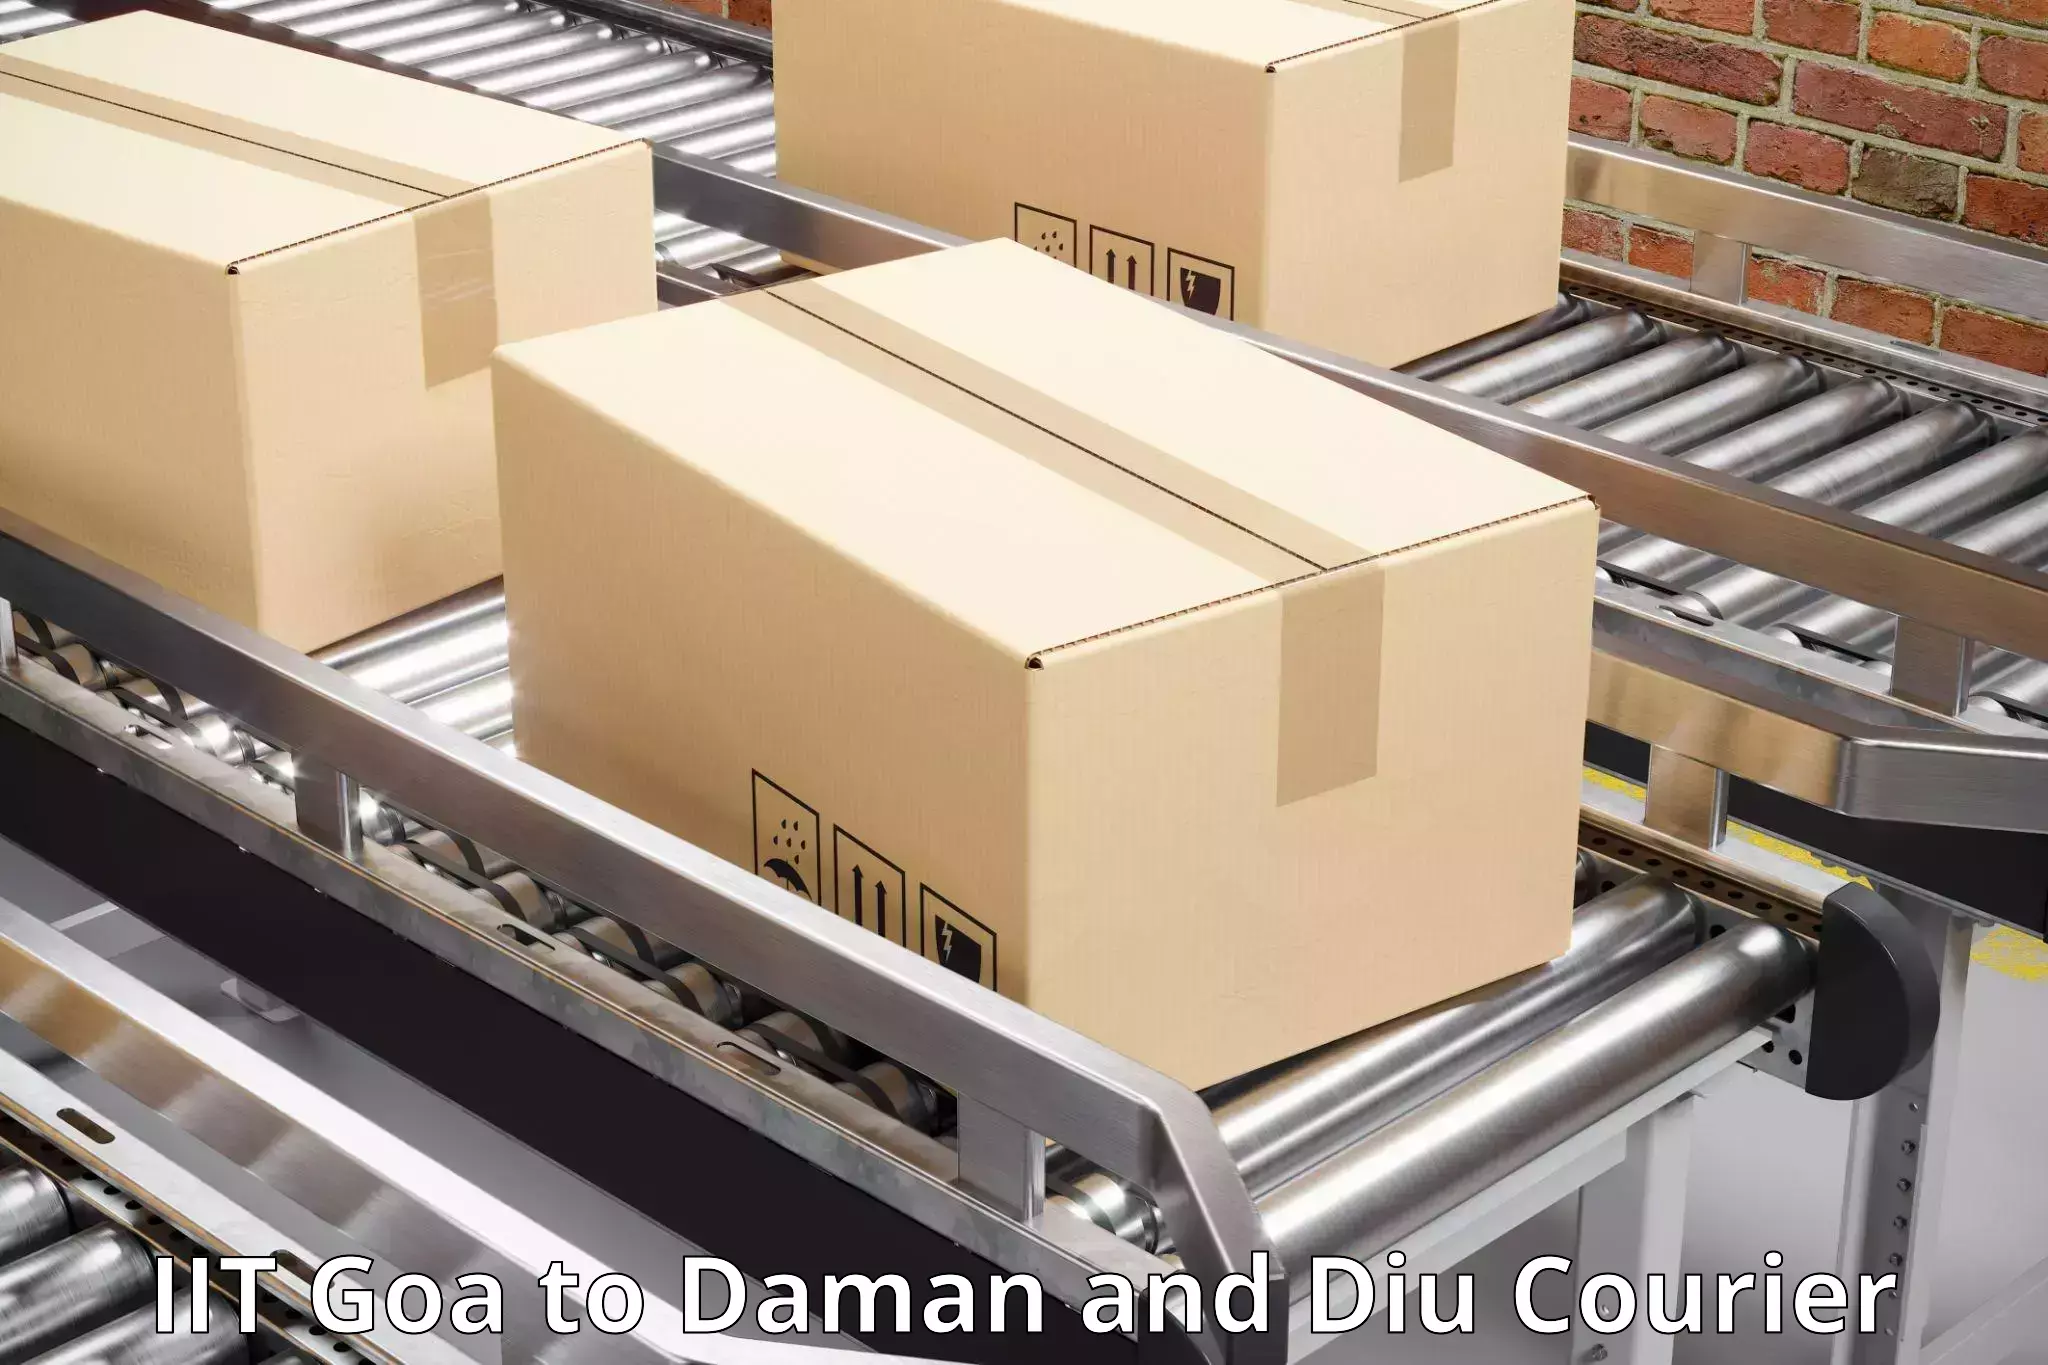 User-friendly delivery service IIT Goa to Daman